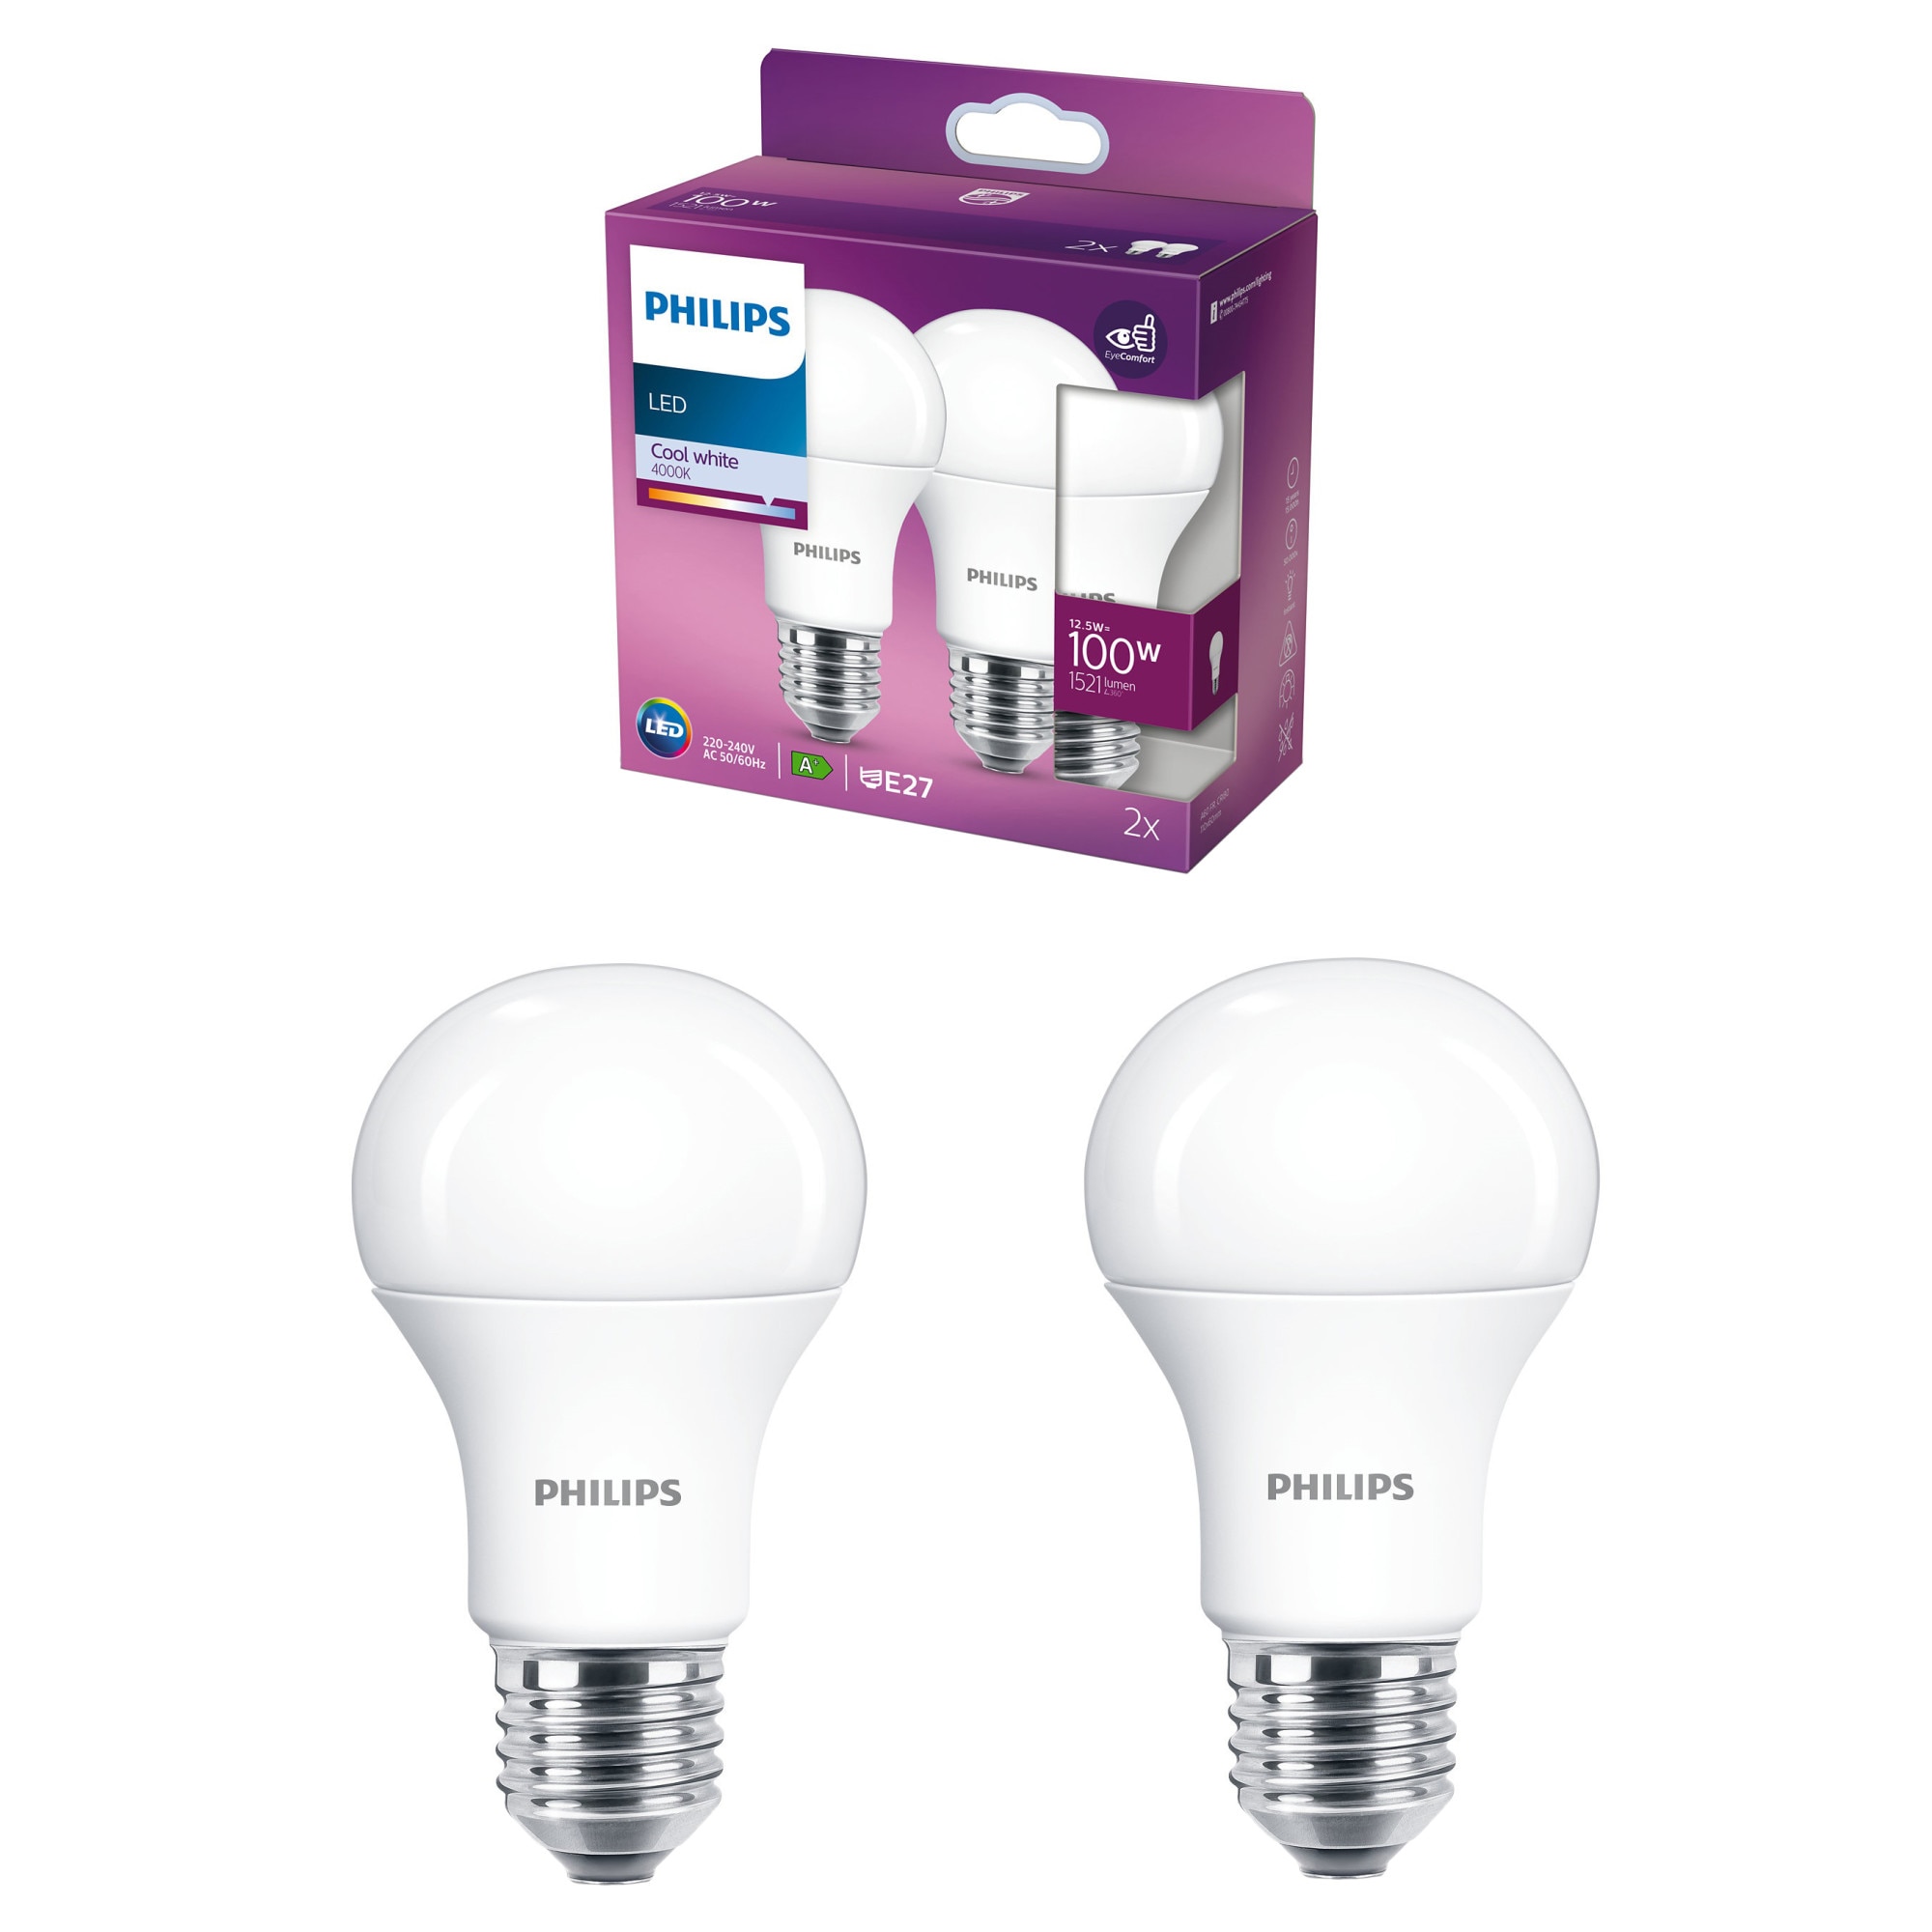 a cup of Preference silhouette Set 2 becuri LED Philips EyeComfort, E27, 12.5W (100W), 1521 lm, lumina  alba rece (4000K), clasa energetica E - eMAG.ro